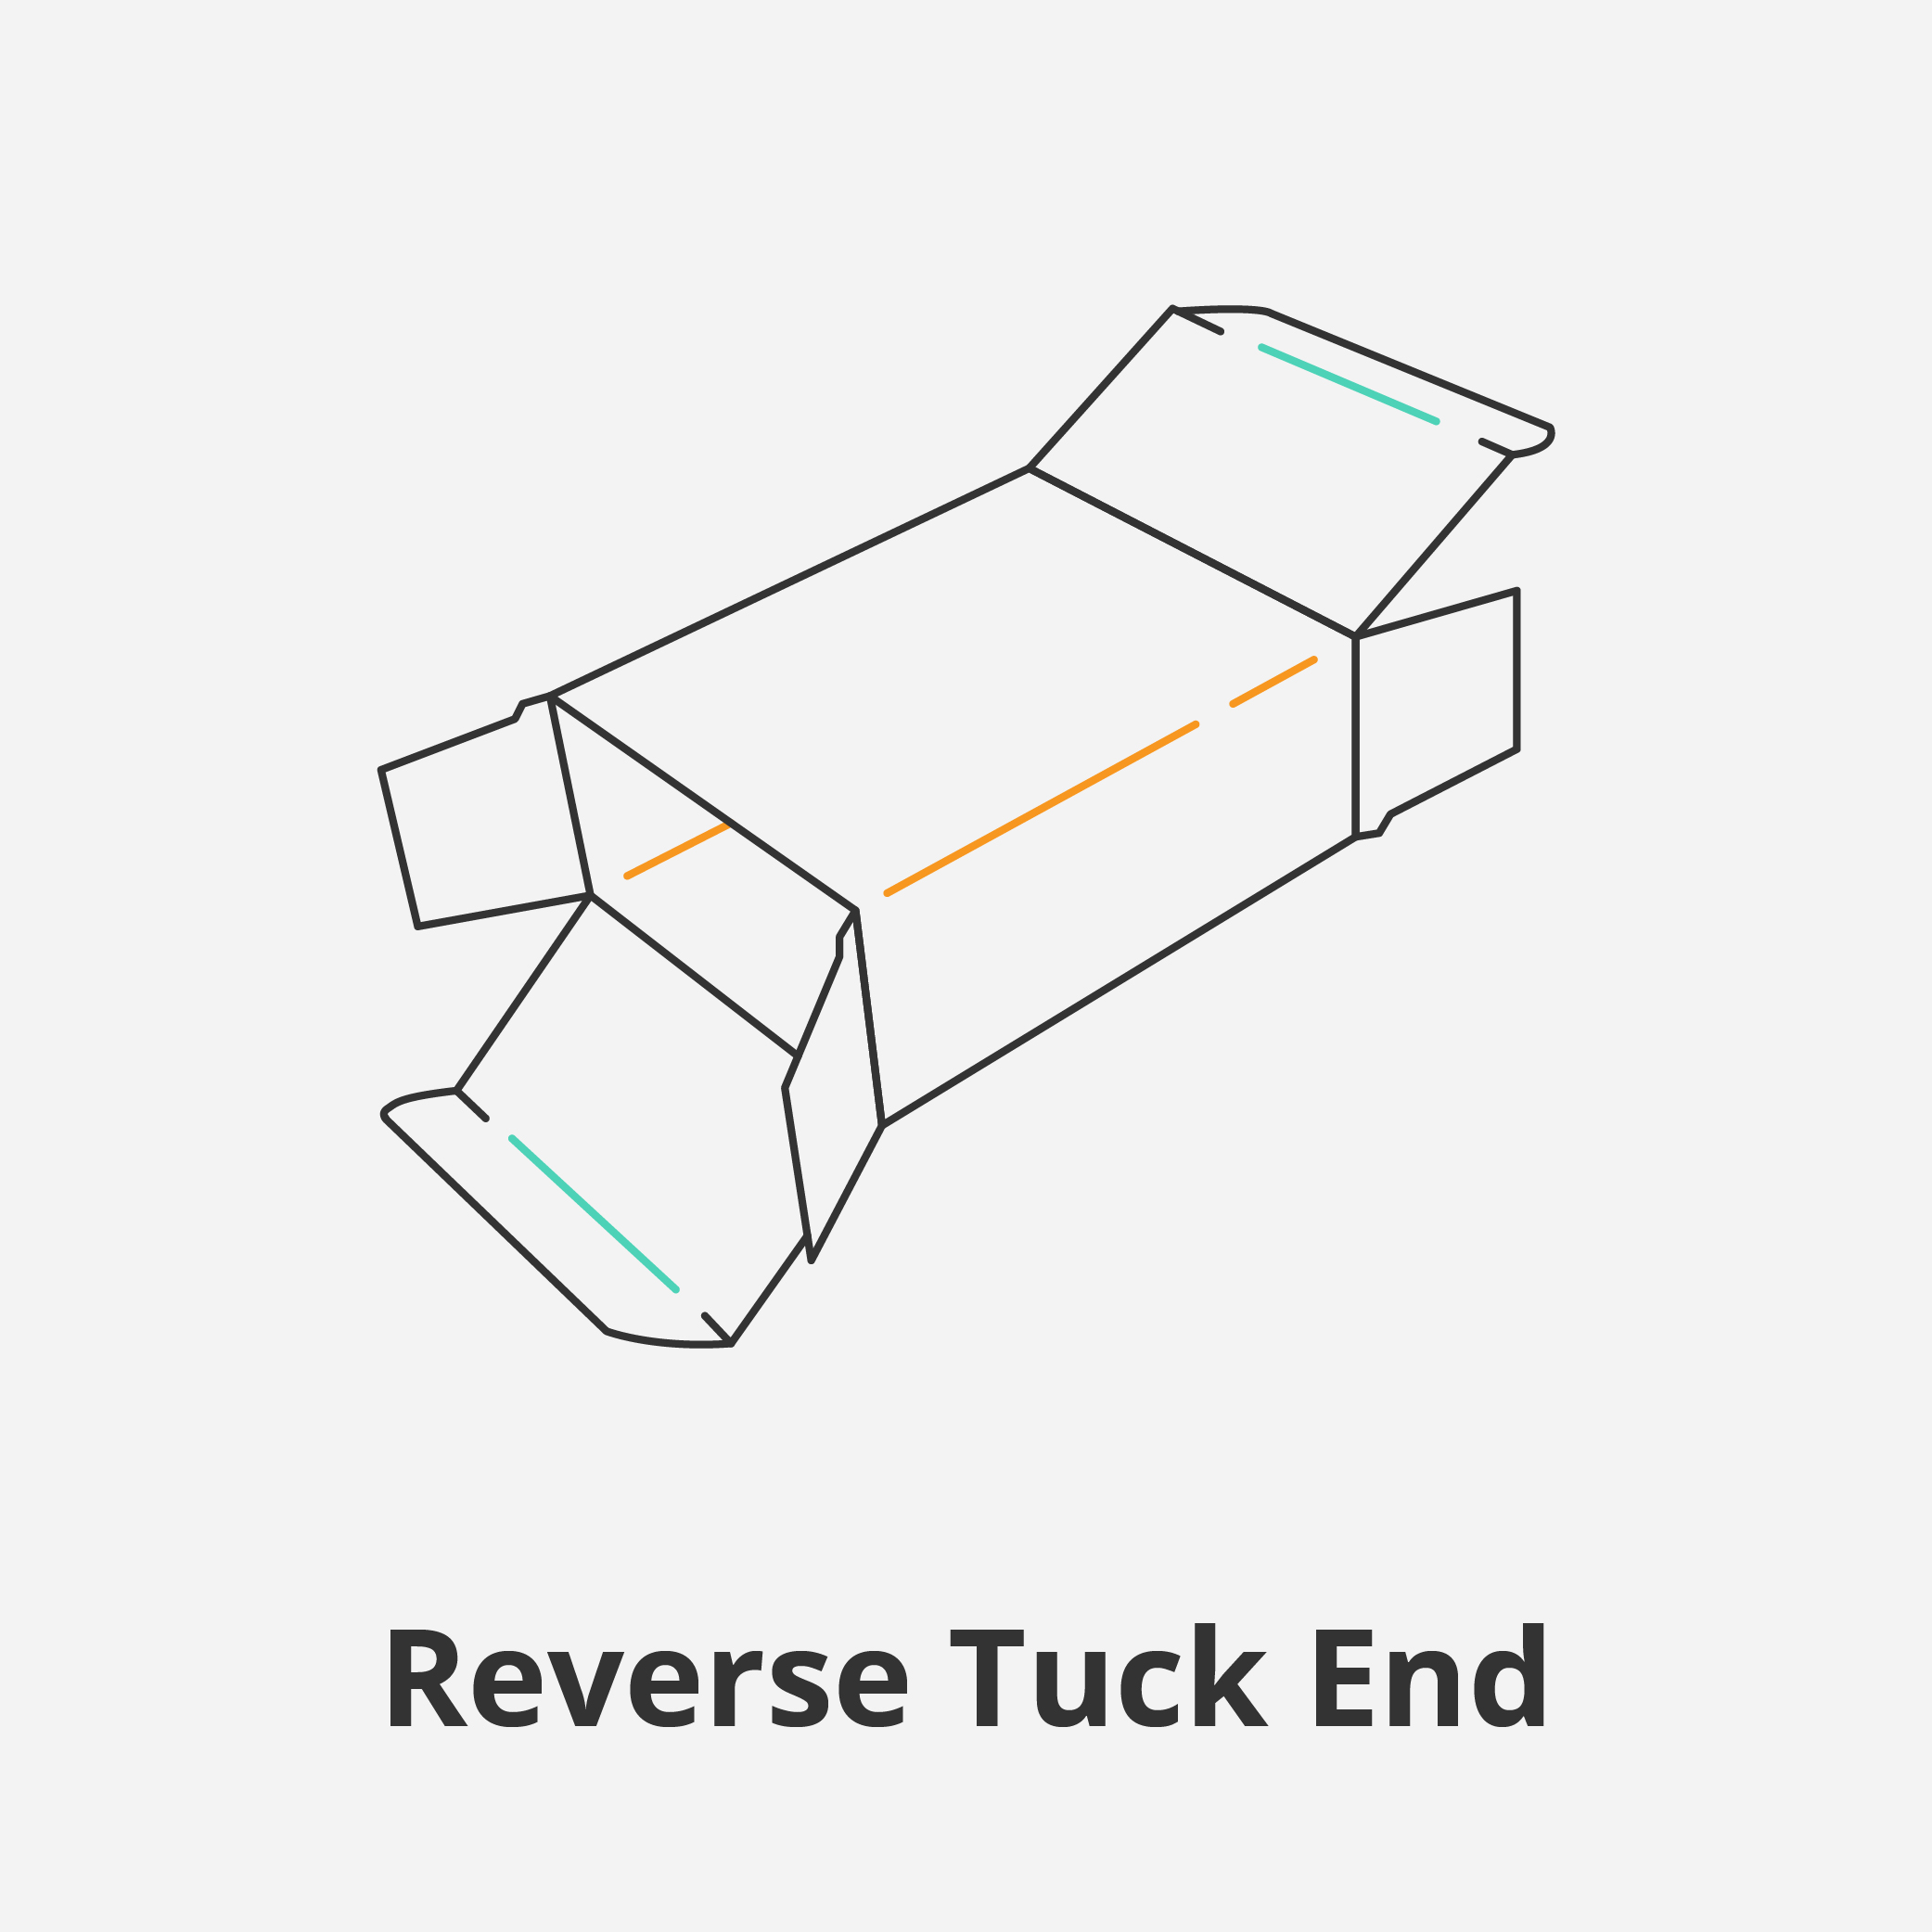 Reverse Tuck End